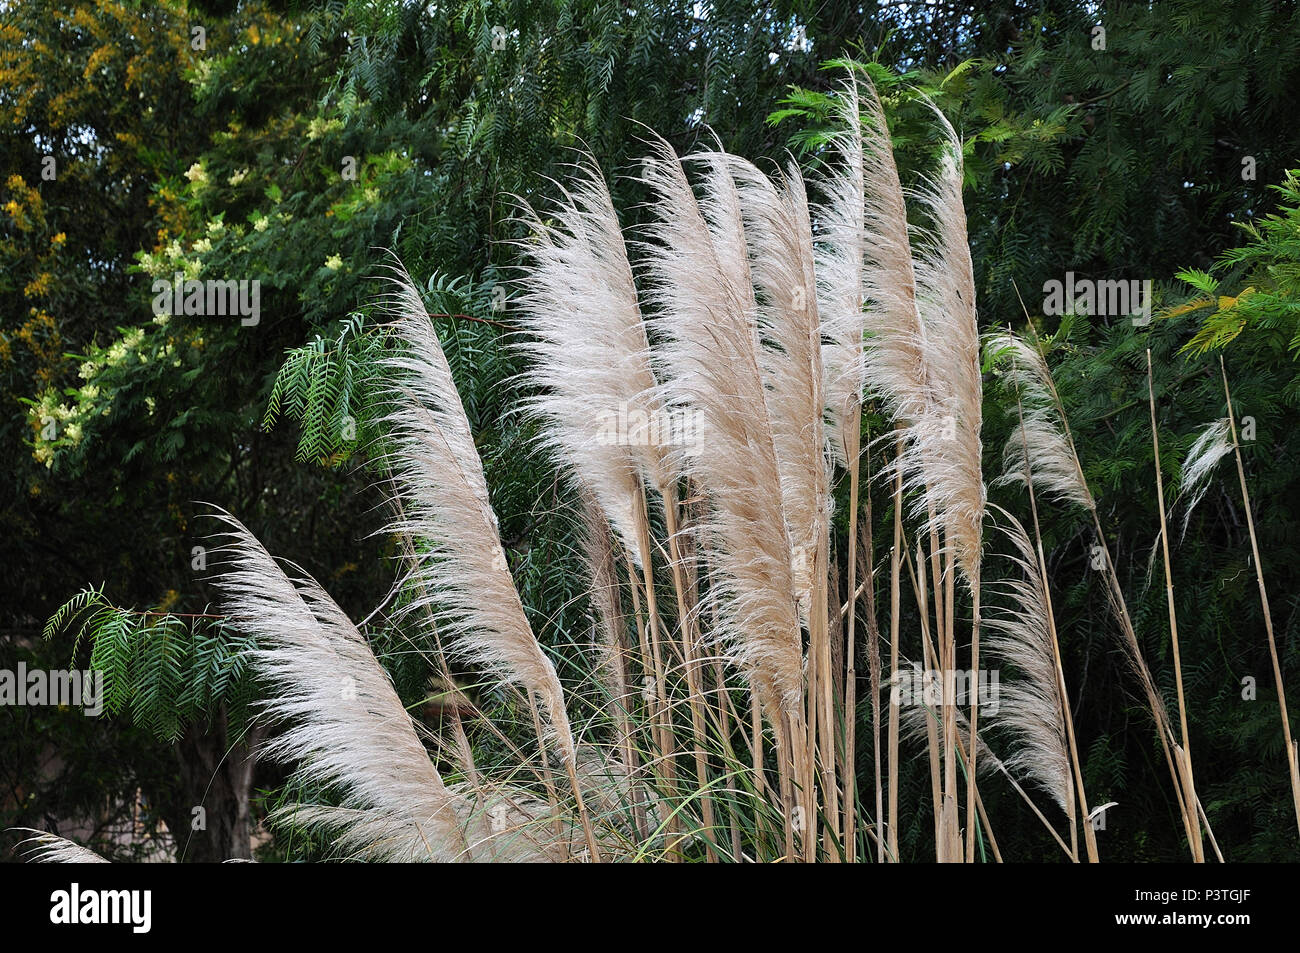 flowering pampas grass, cortaderia selloana, in front of blooming trees in moroccan garden Stock Photo